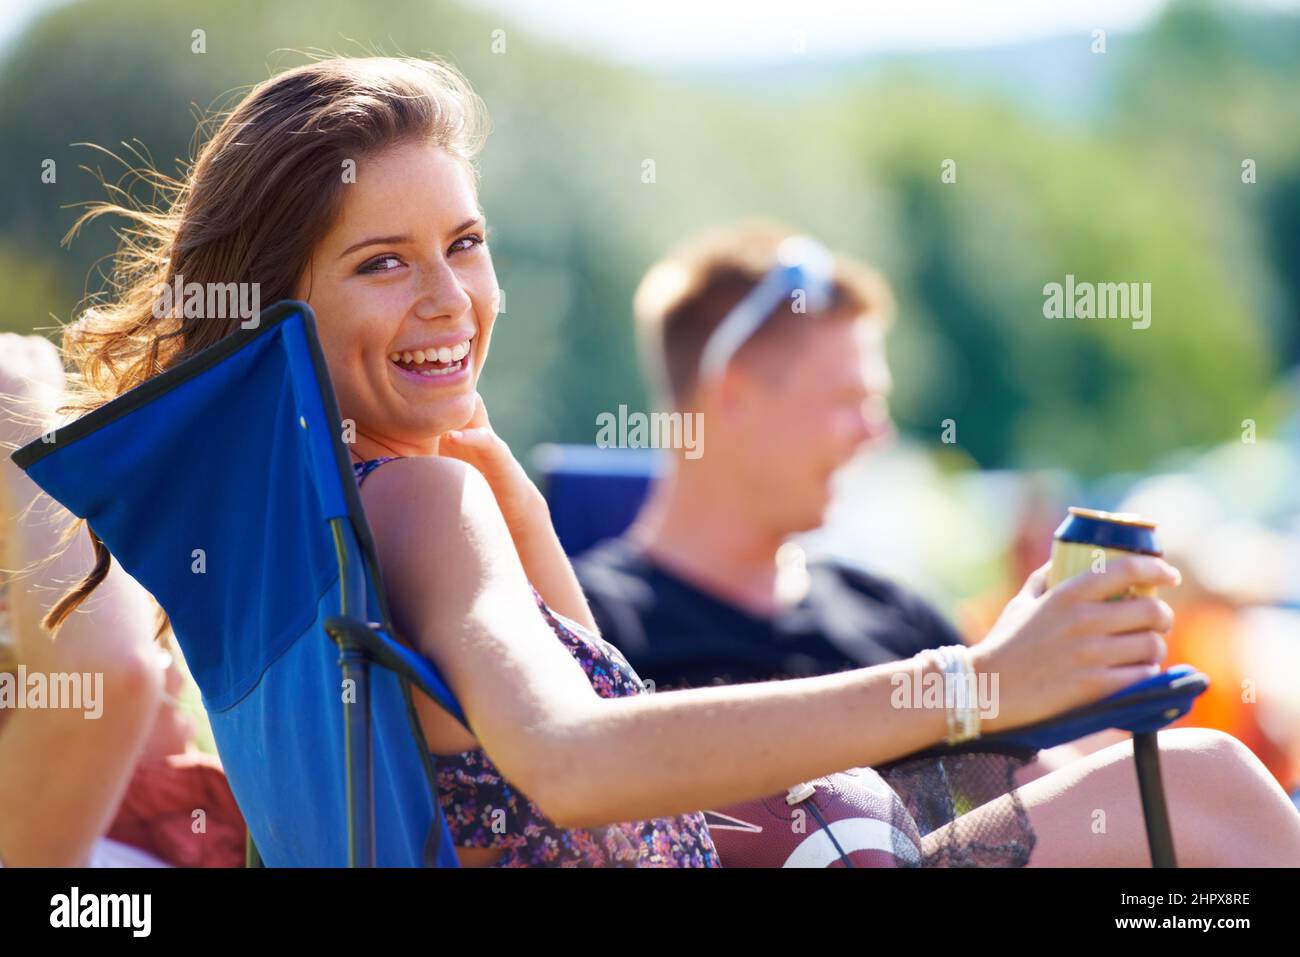 Enjoying her cold beer on a warm day. Portrait of an attractive young woman having a beer while sitting with her friends at a campsite. Stock Photo